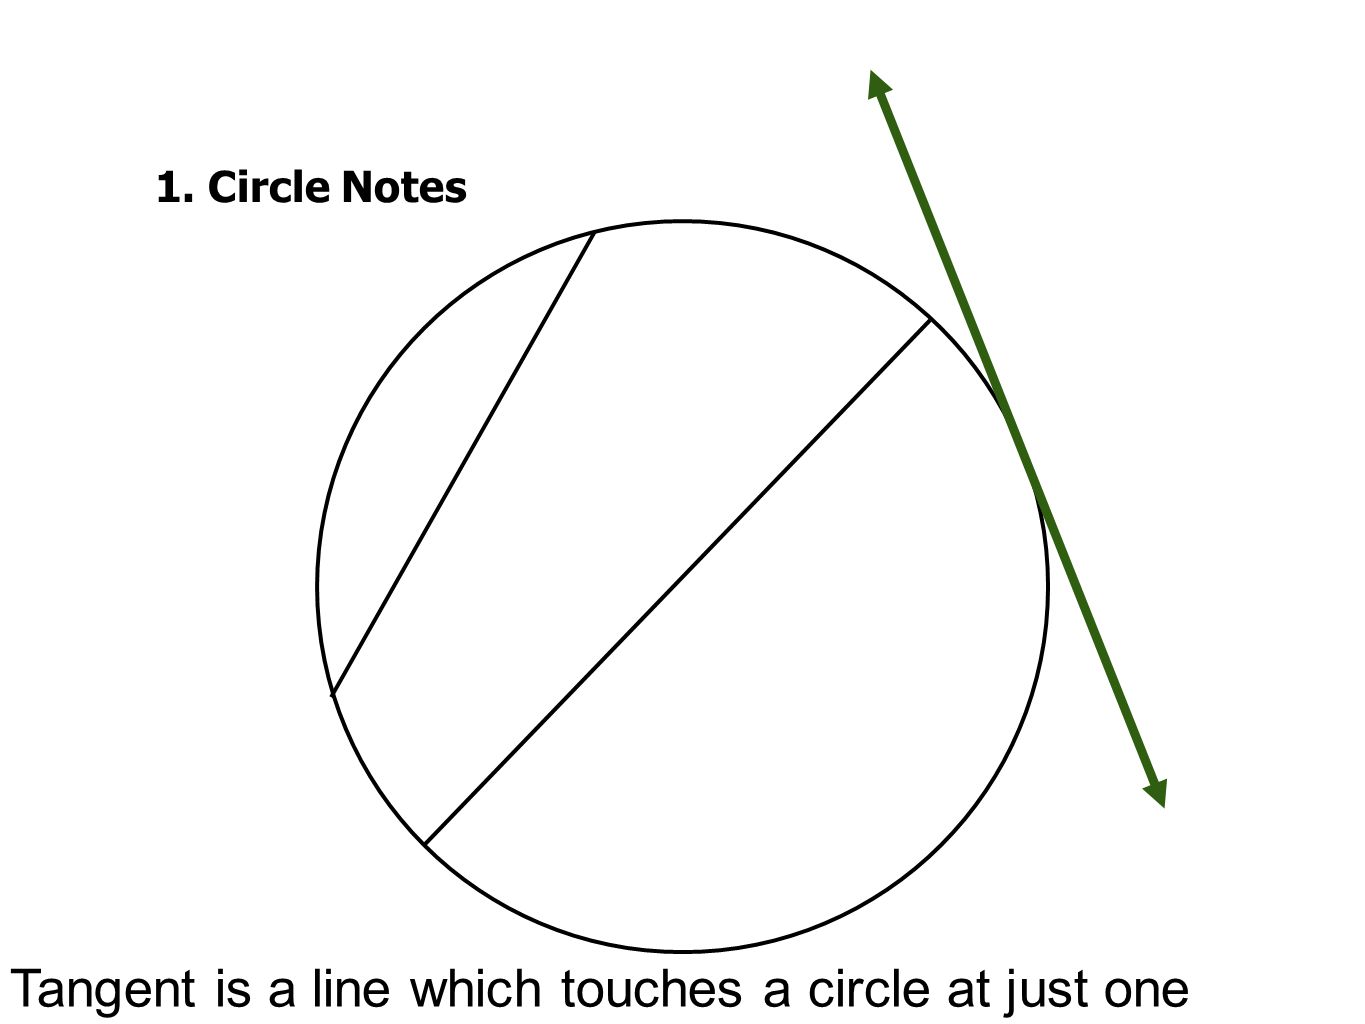 Tangent is a line which touches a circle at just one point.